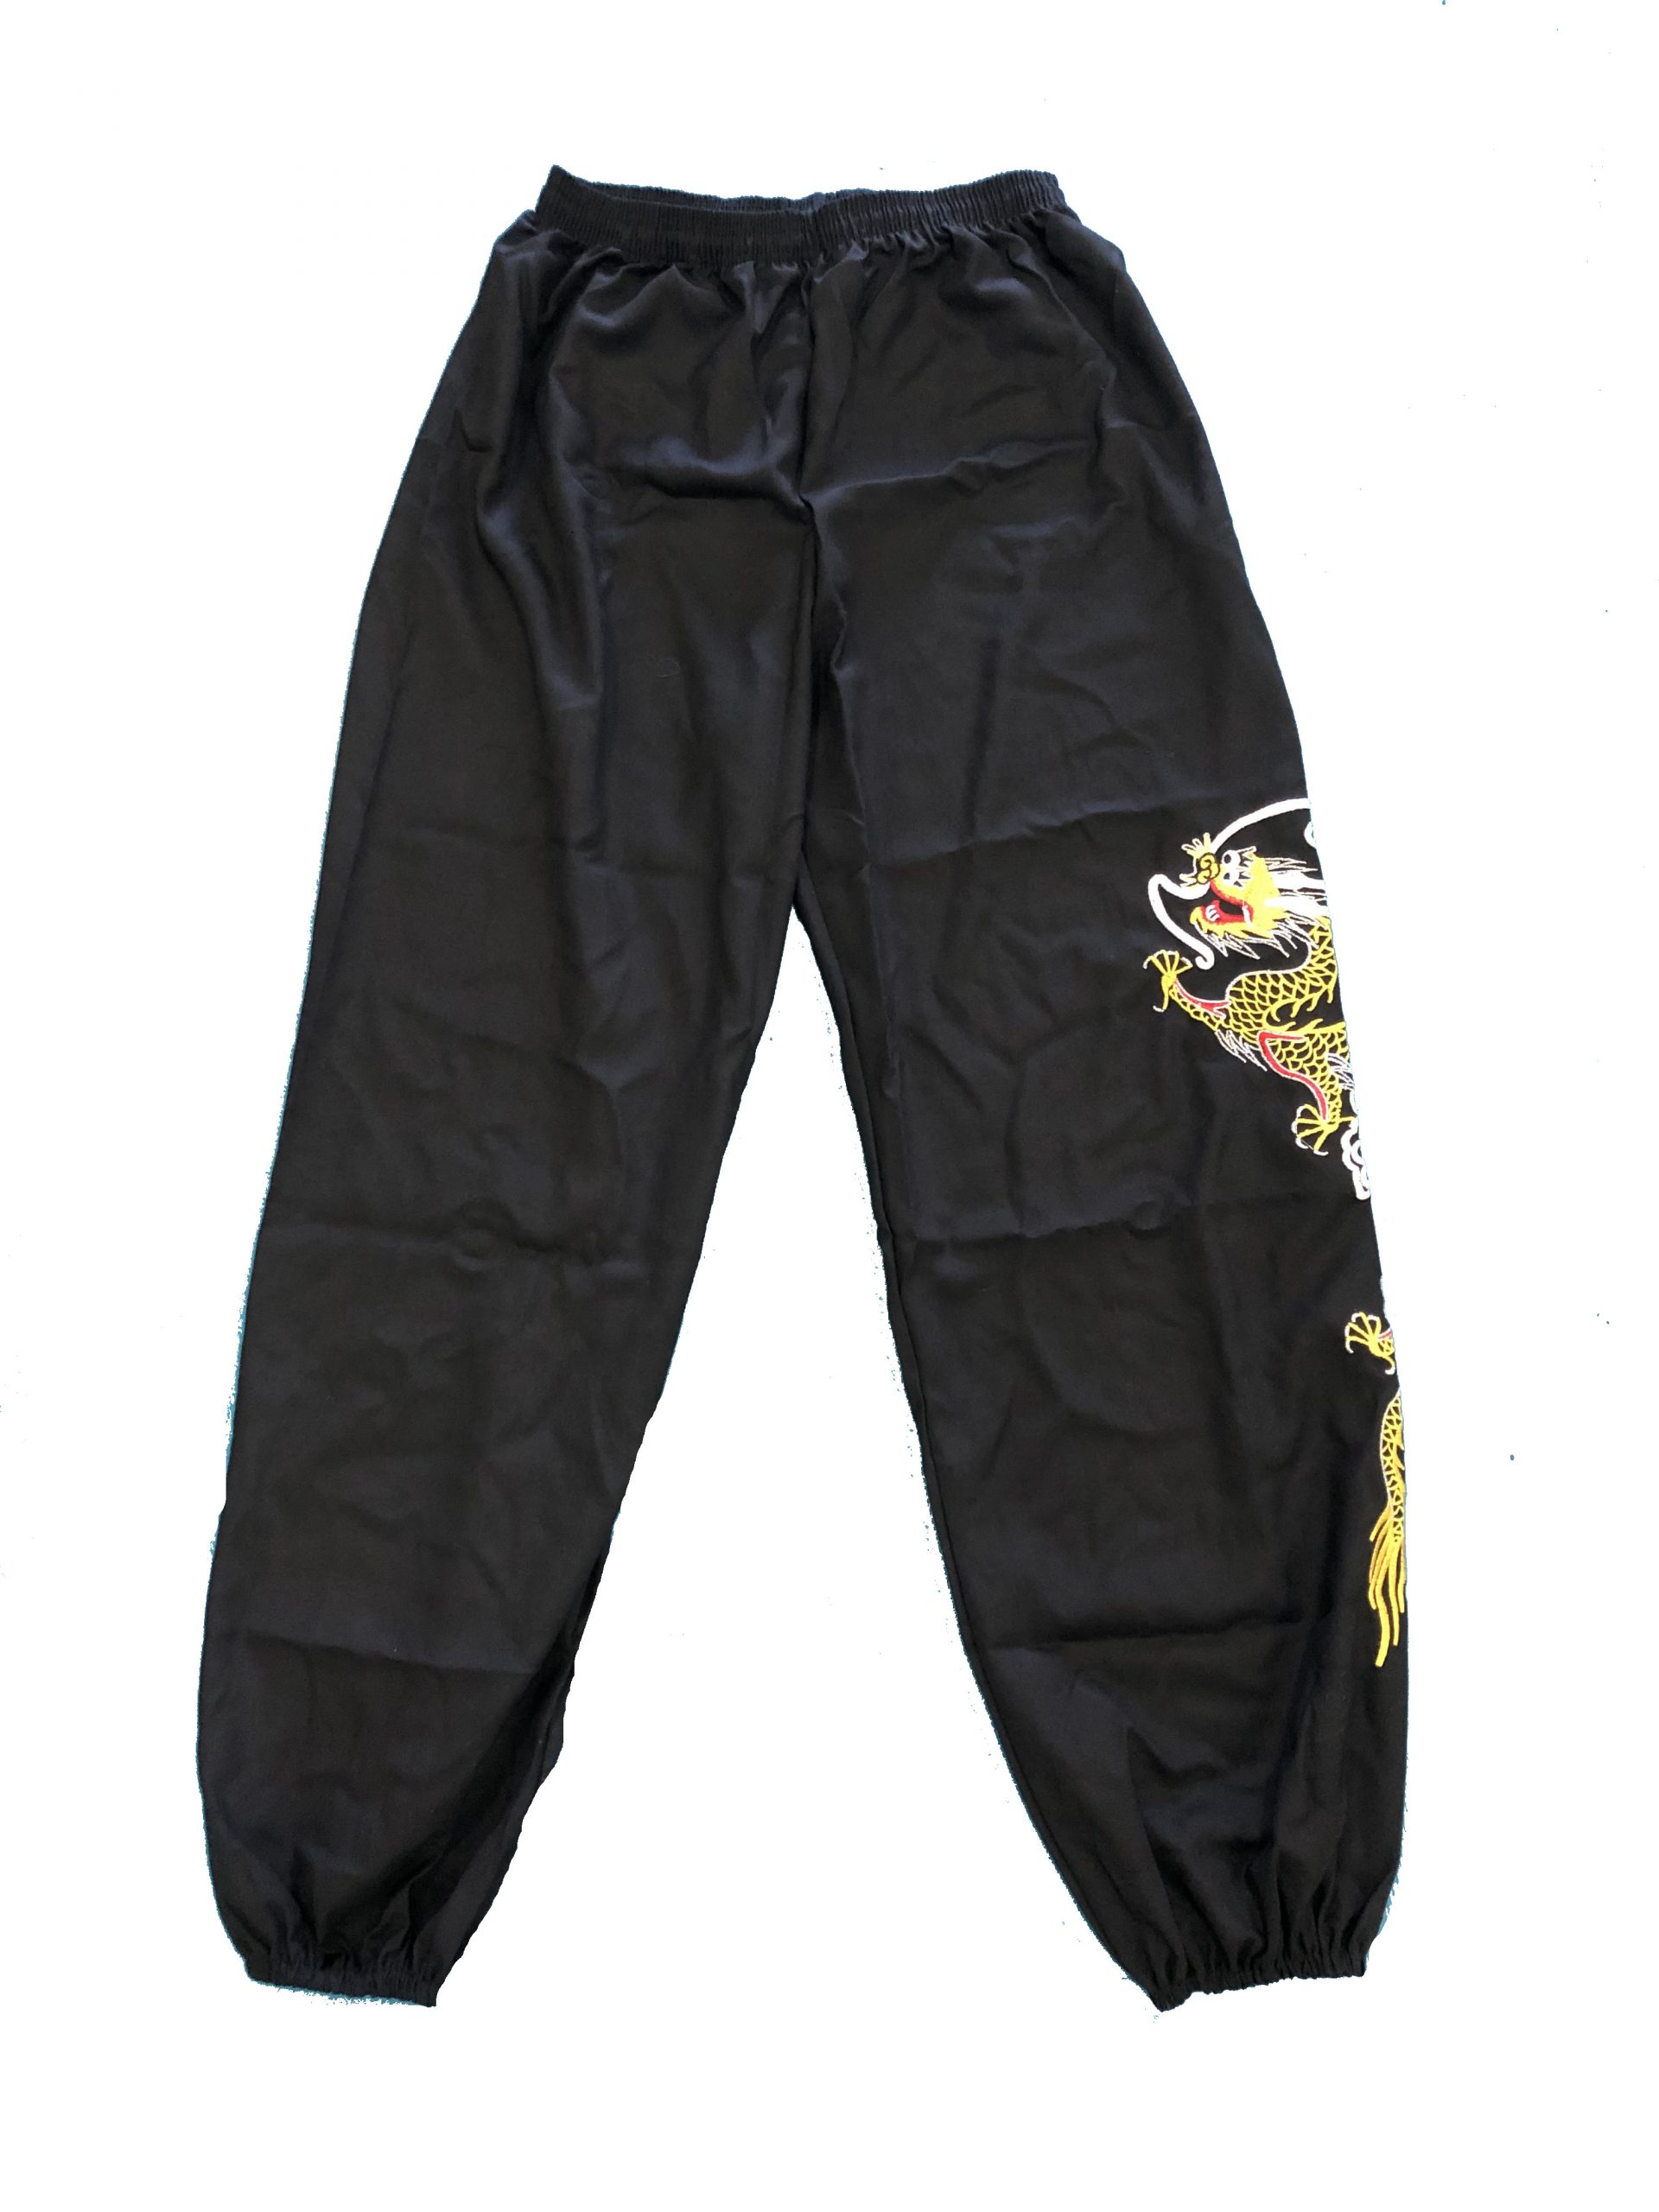 MAR Black Traditional Tai Chi Kung-Fu Trousers Adult Sizes | eBay